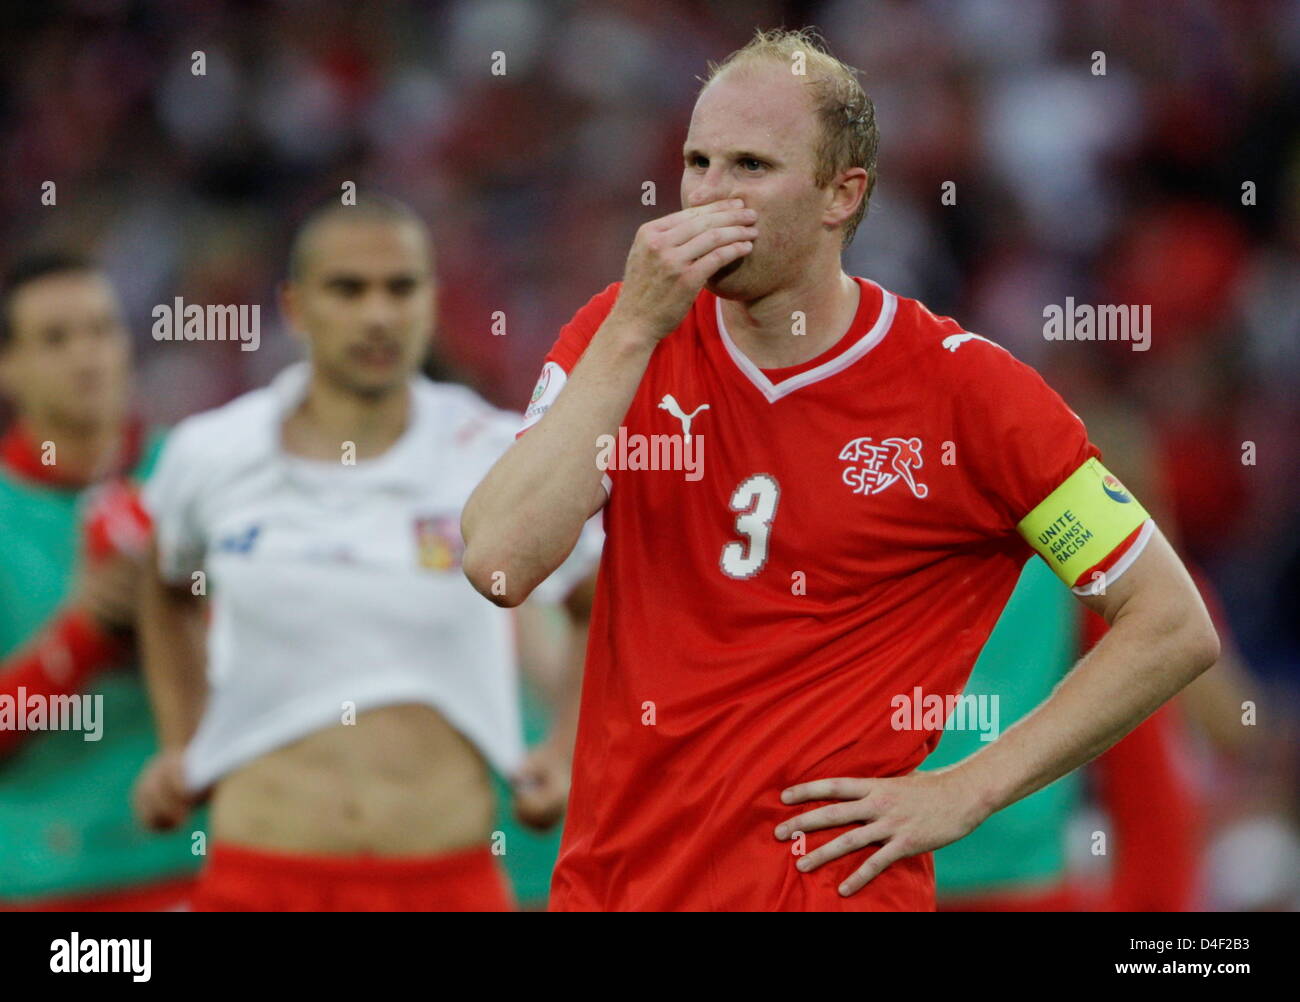 Ludovic Magnin of Switzerland reacts after the EURO 2008 preliminary round group A match in St. Jakobs Arena, Basel, Switzerland, 07 June 2008. Switzerland lost 0-1. Photo: Oliver Berg dpa +please note UEFA restrictions particularly in regard to slide shows and 'No Mobile Services'+ +++(c) dpa - Bildfunk+++ Stock Photo